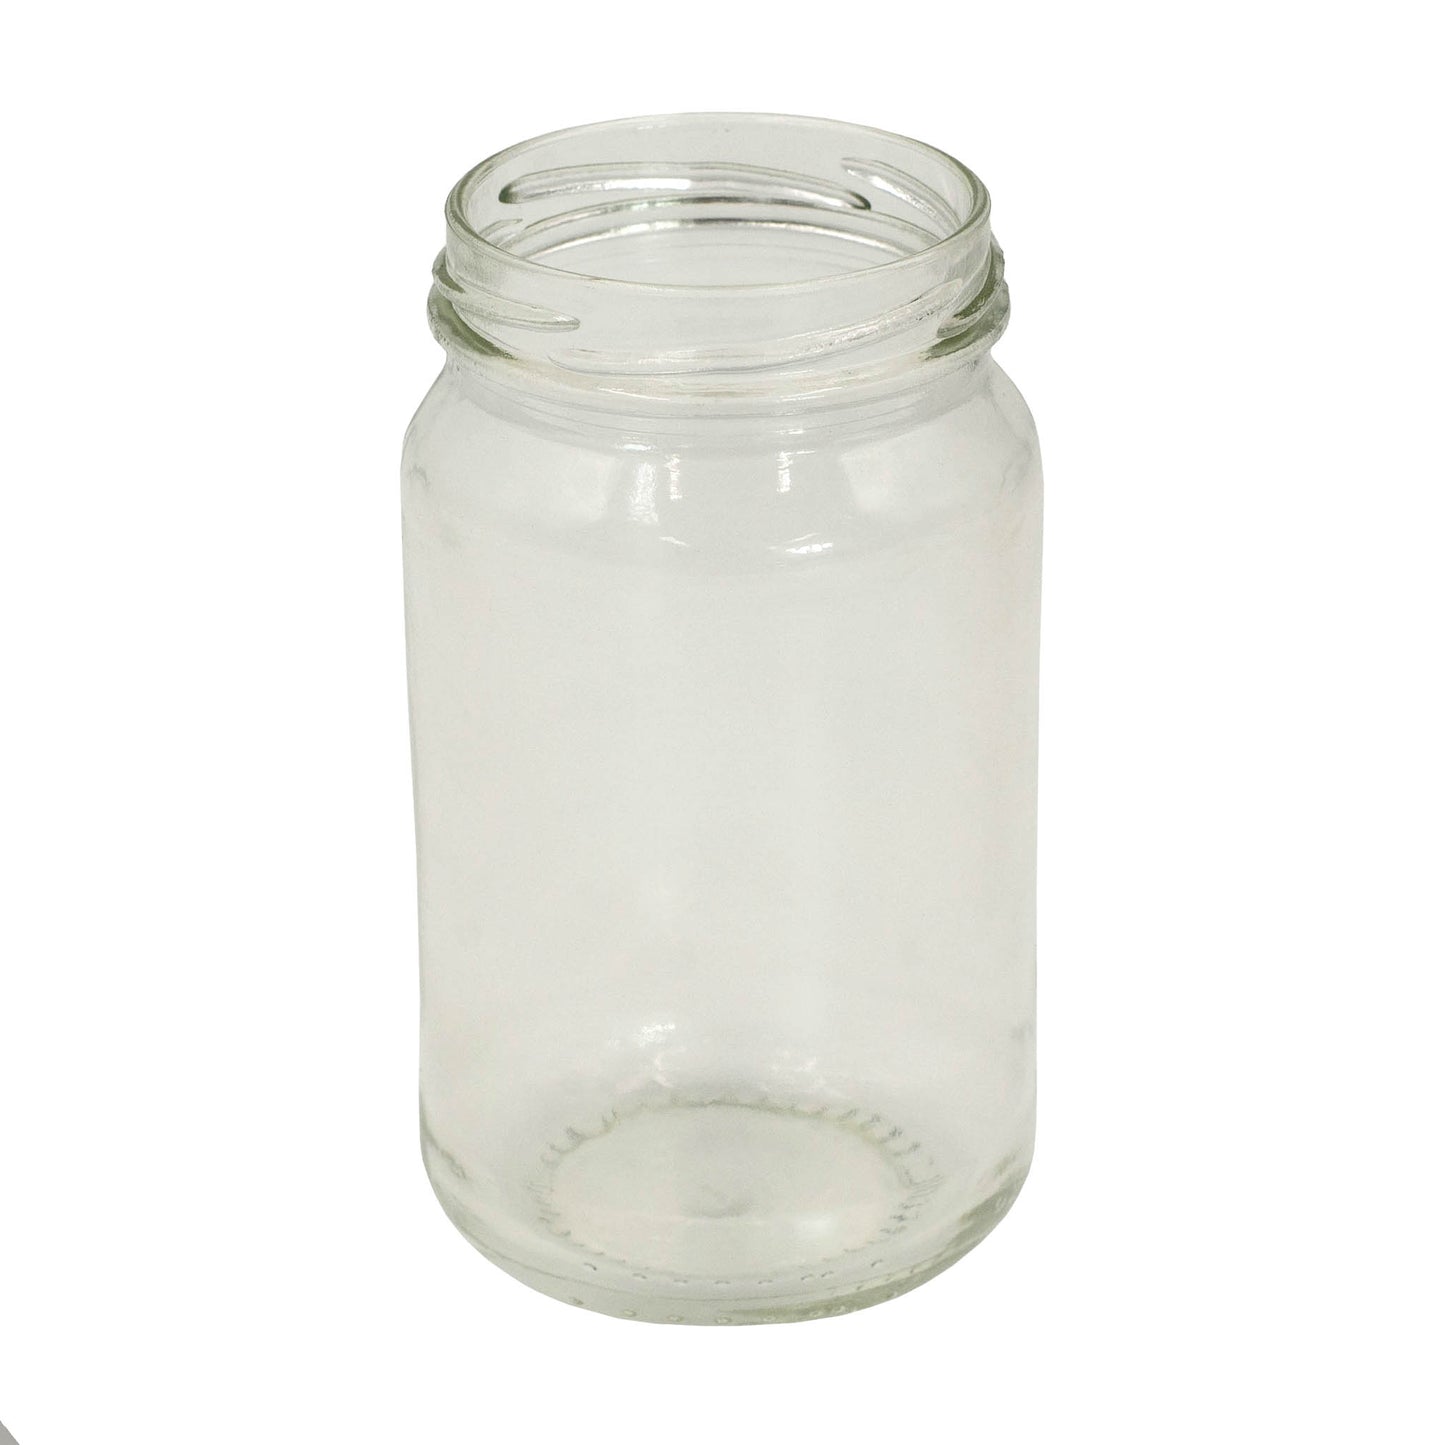 375 ml glass jar with 63mm screw top opening. 